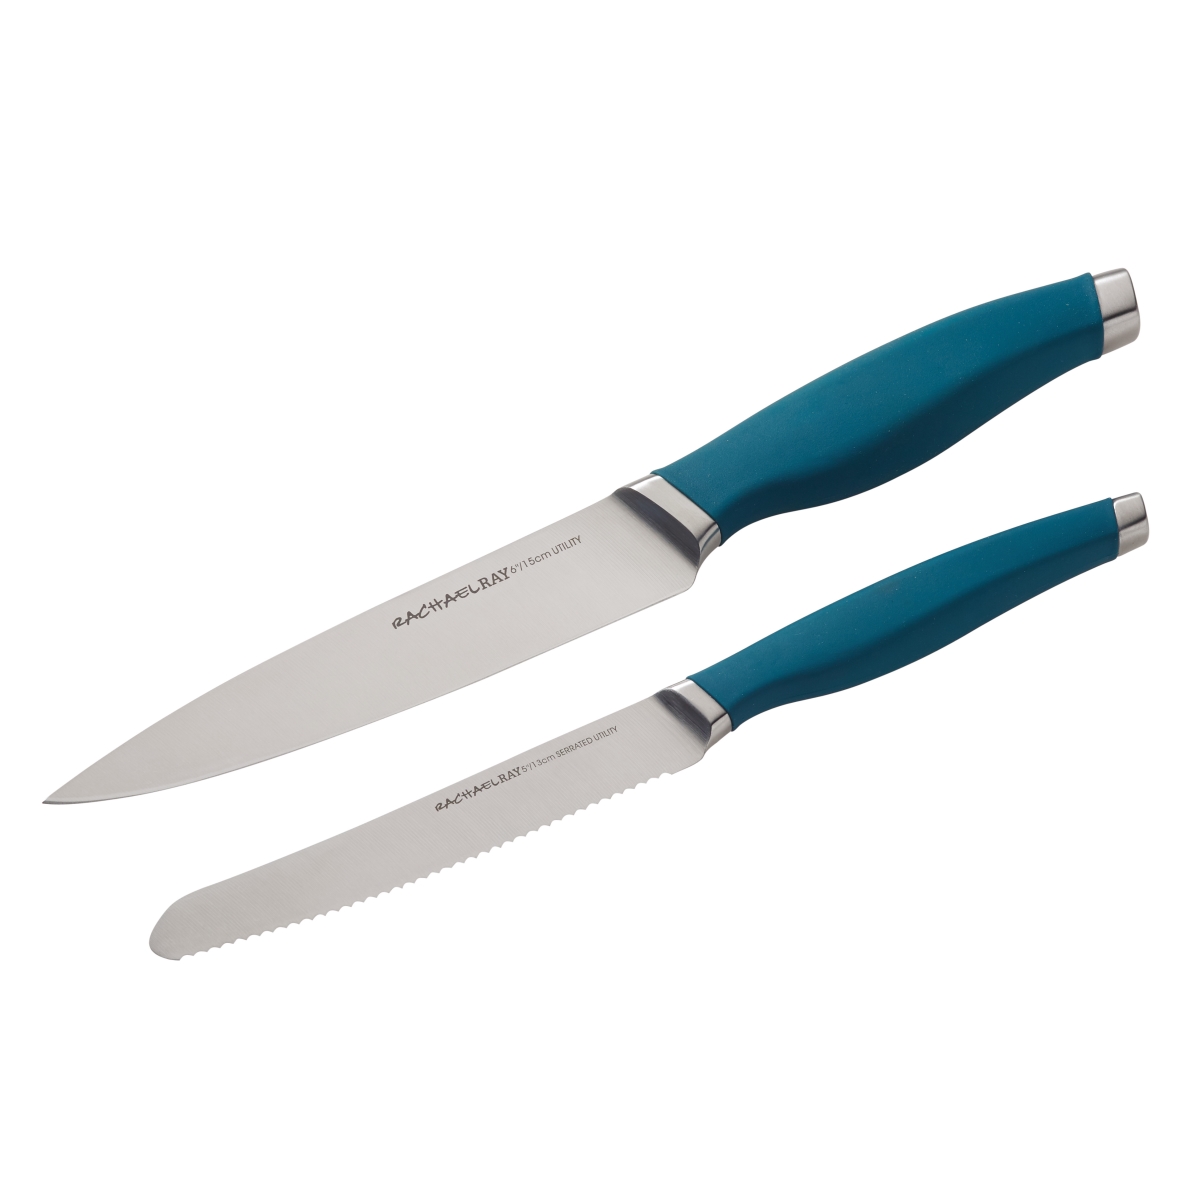 47758 Cutlery Japanese Stainless Steel Utility Knife Set - Teal, 2 Piece